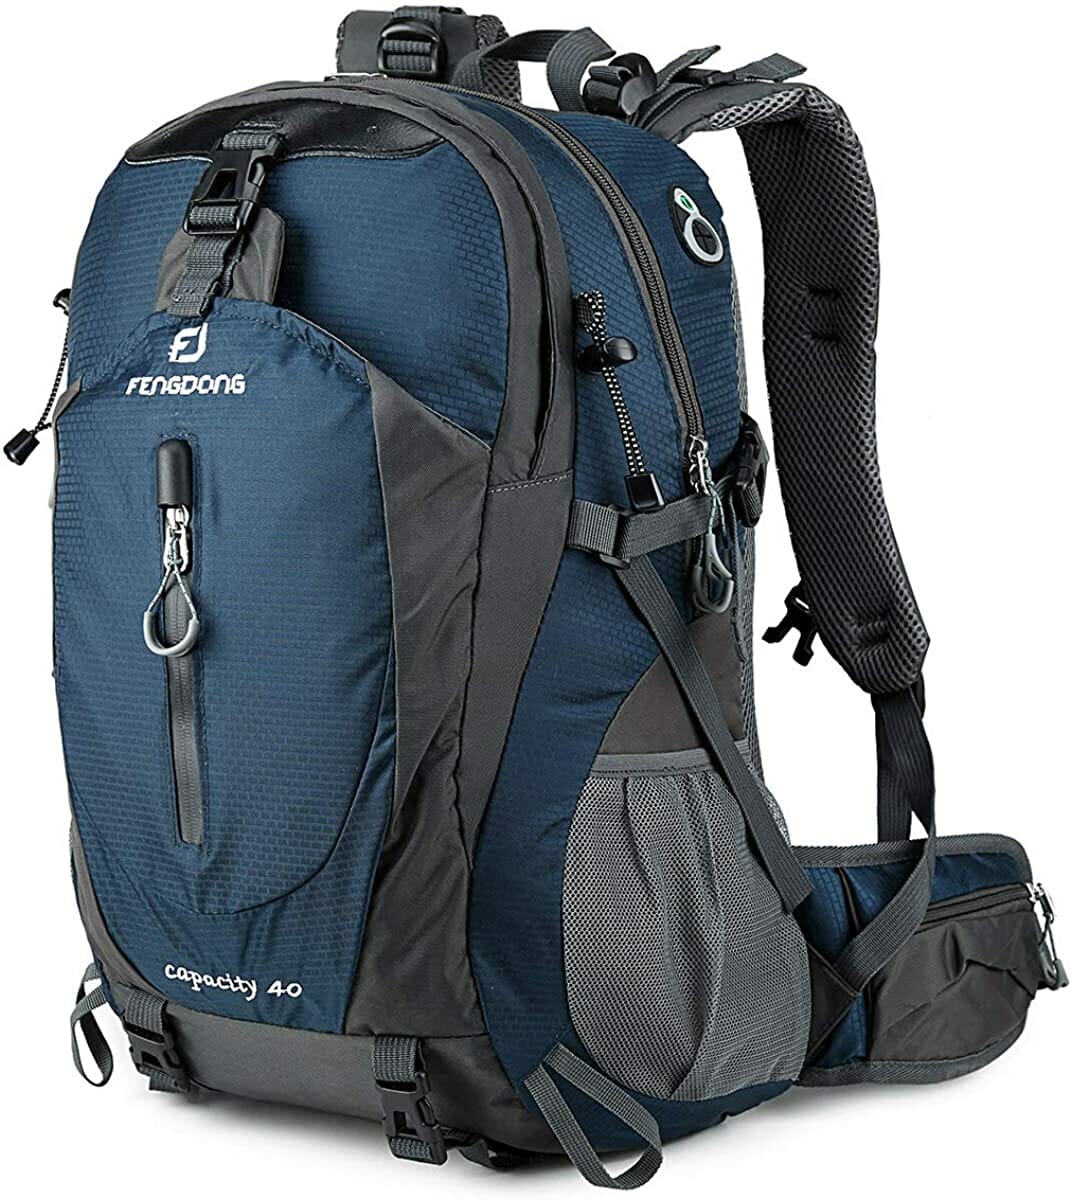 day pack for alaska vacation